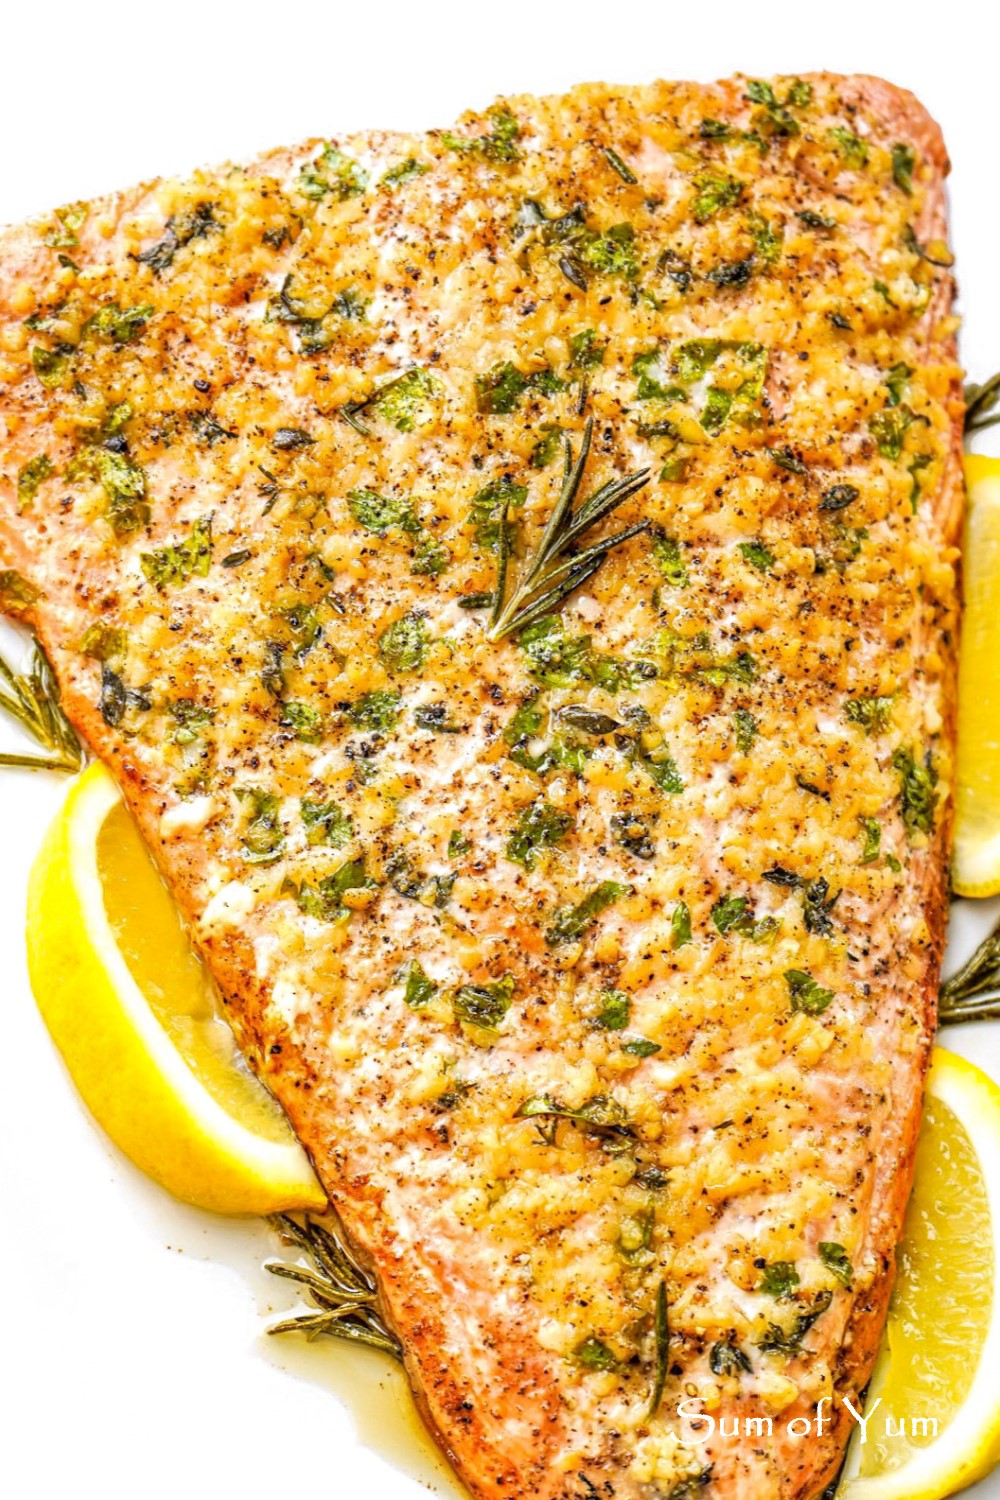  Baked Salmon with Garlic & Herbs 